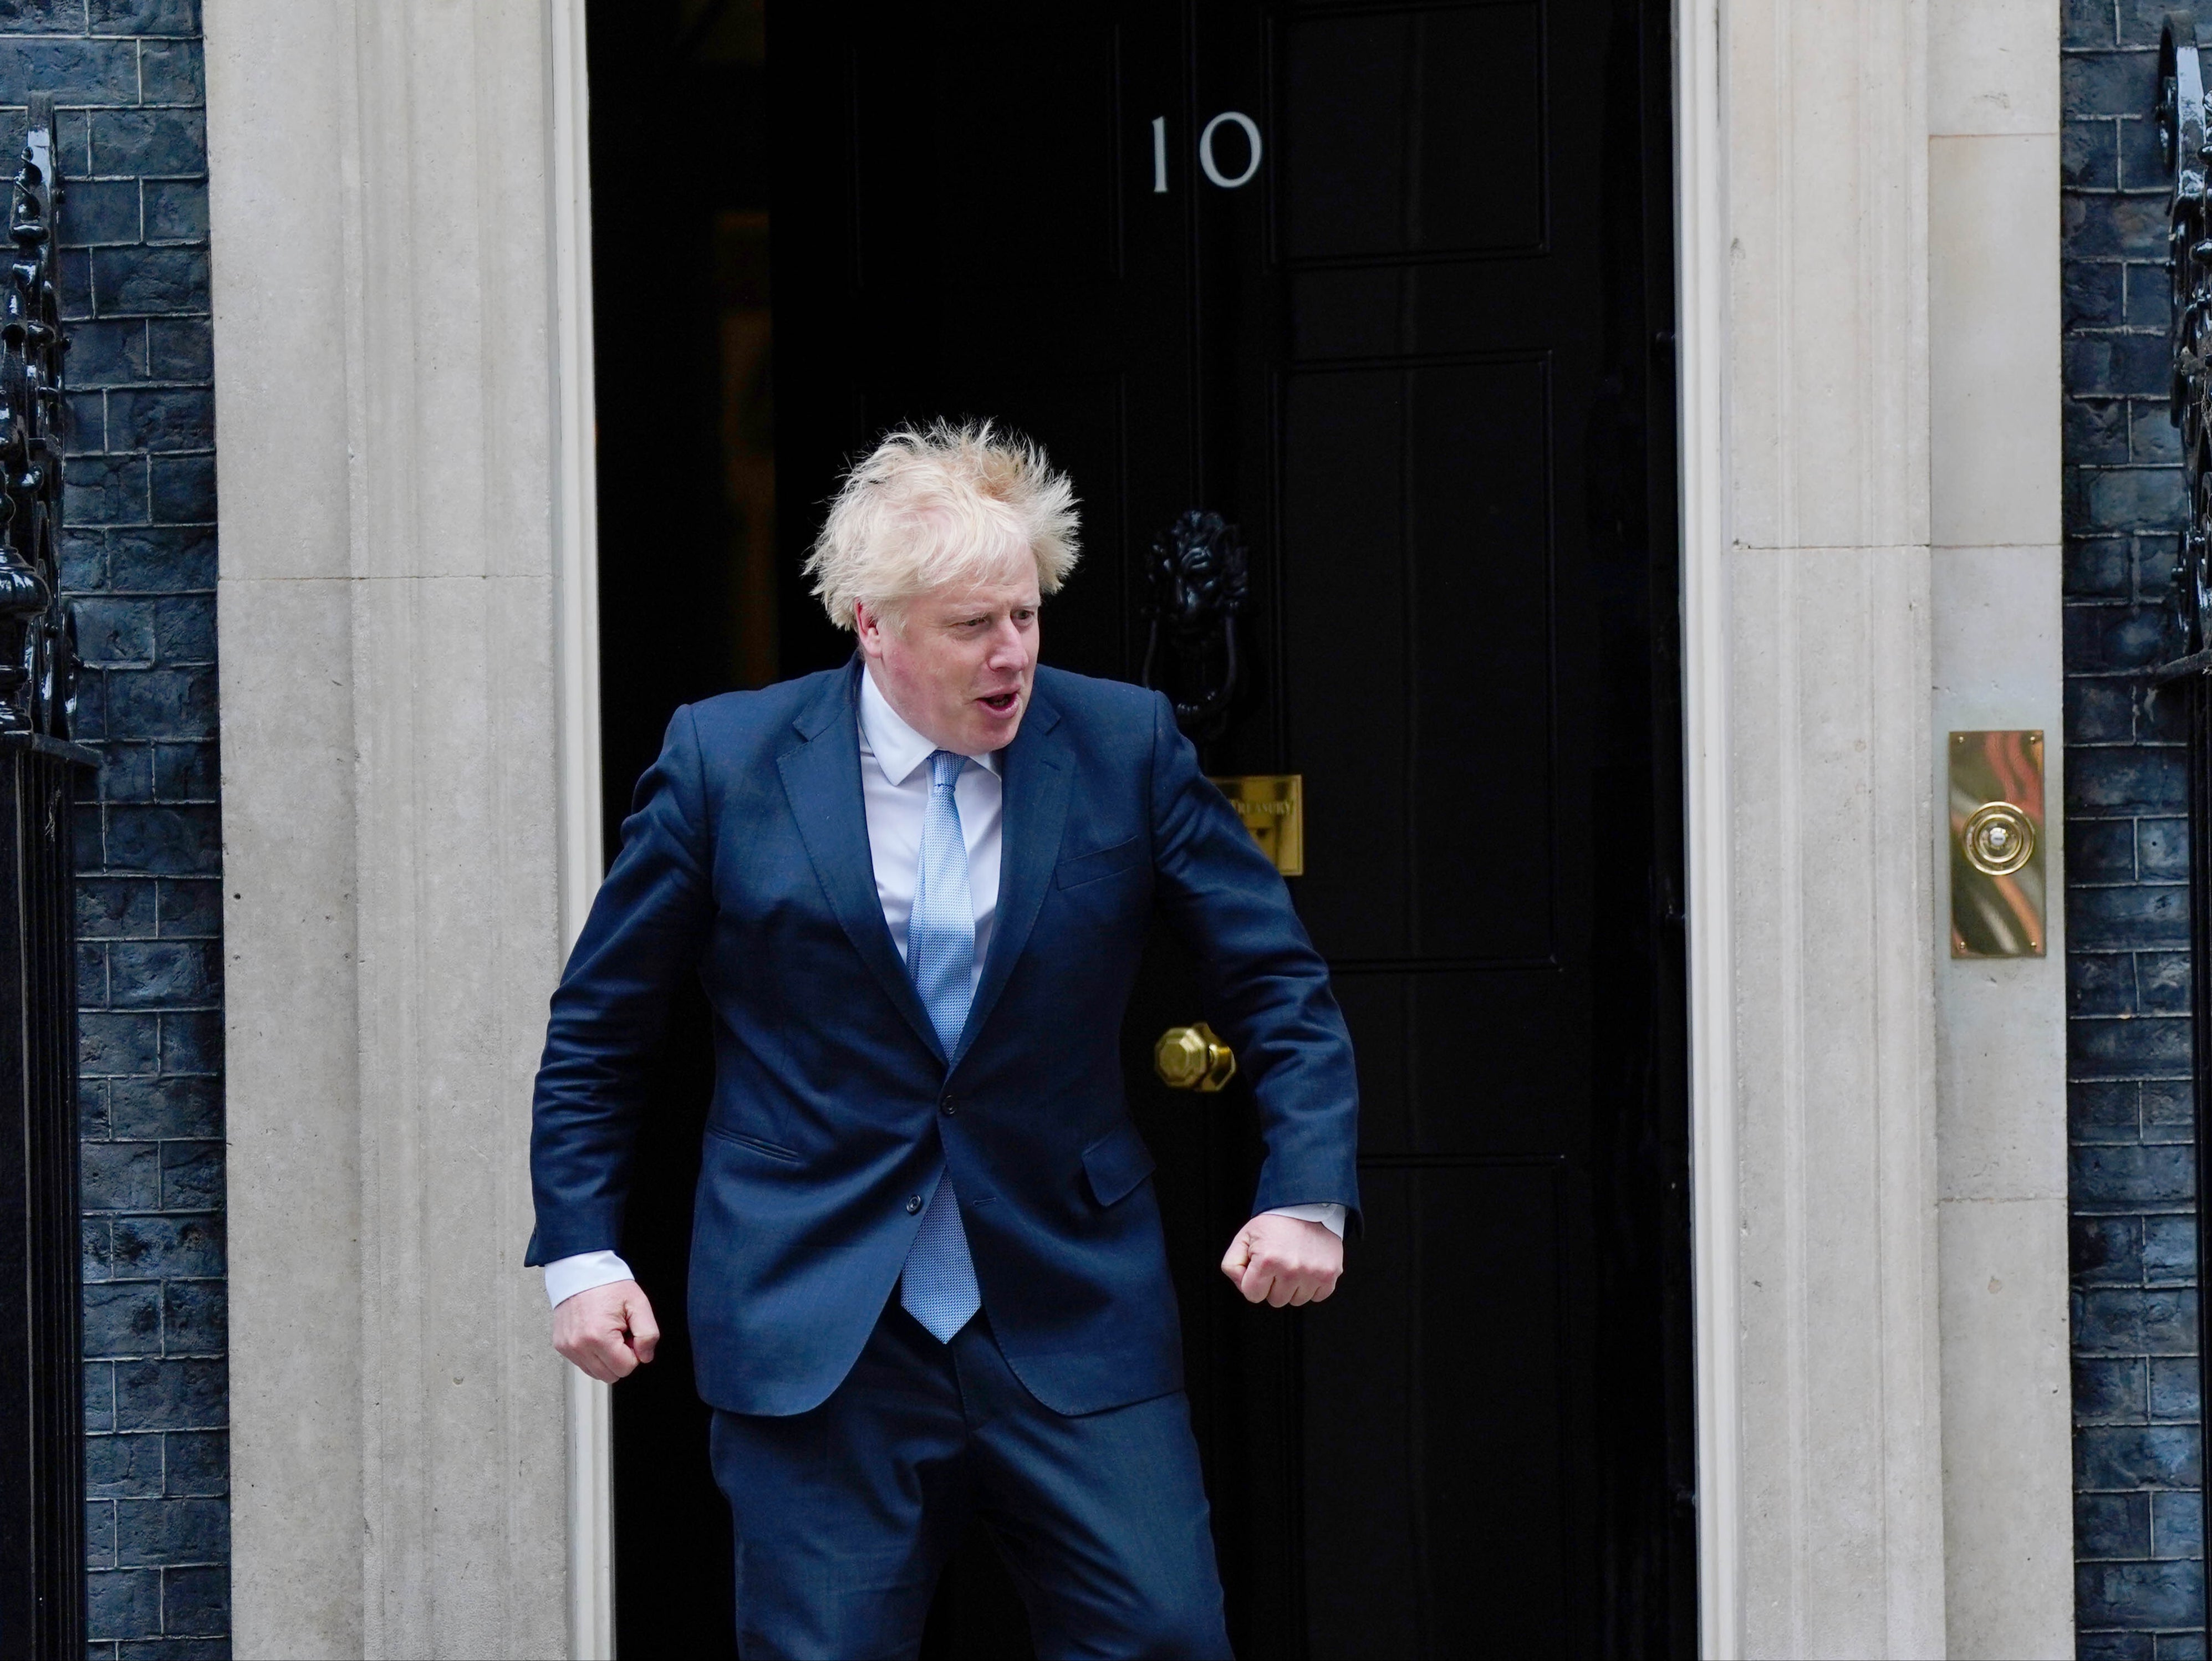 Boris Johnson appears pumped for his meeting with Norway’s PM